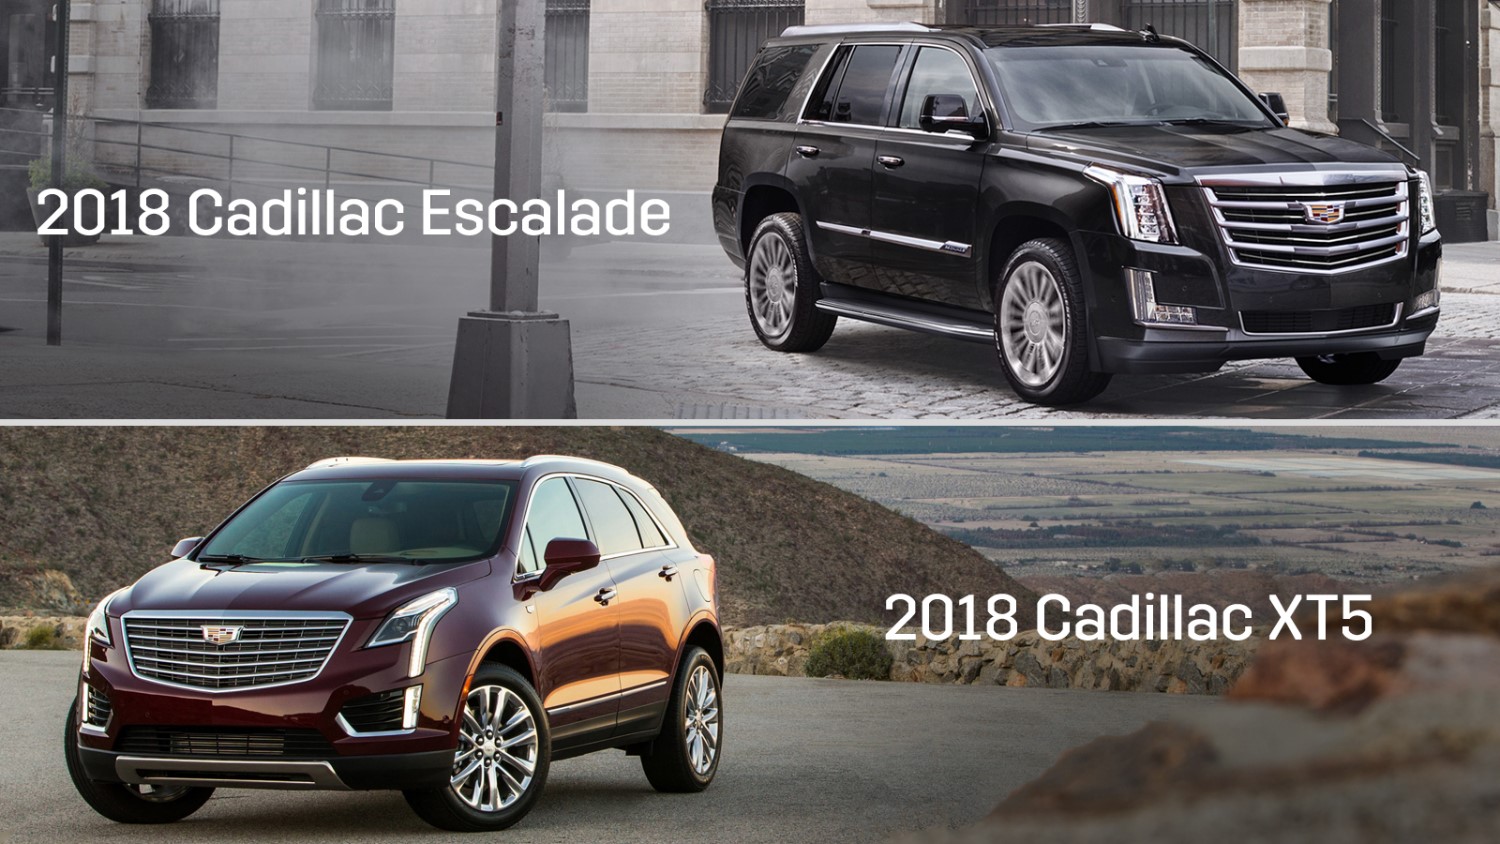 Americans and Asians have an insatiable appetite for Cadillac SUVs